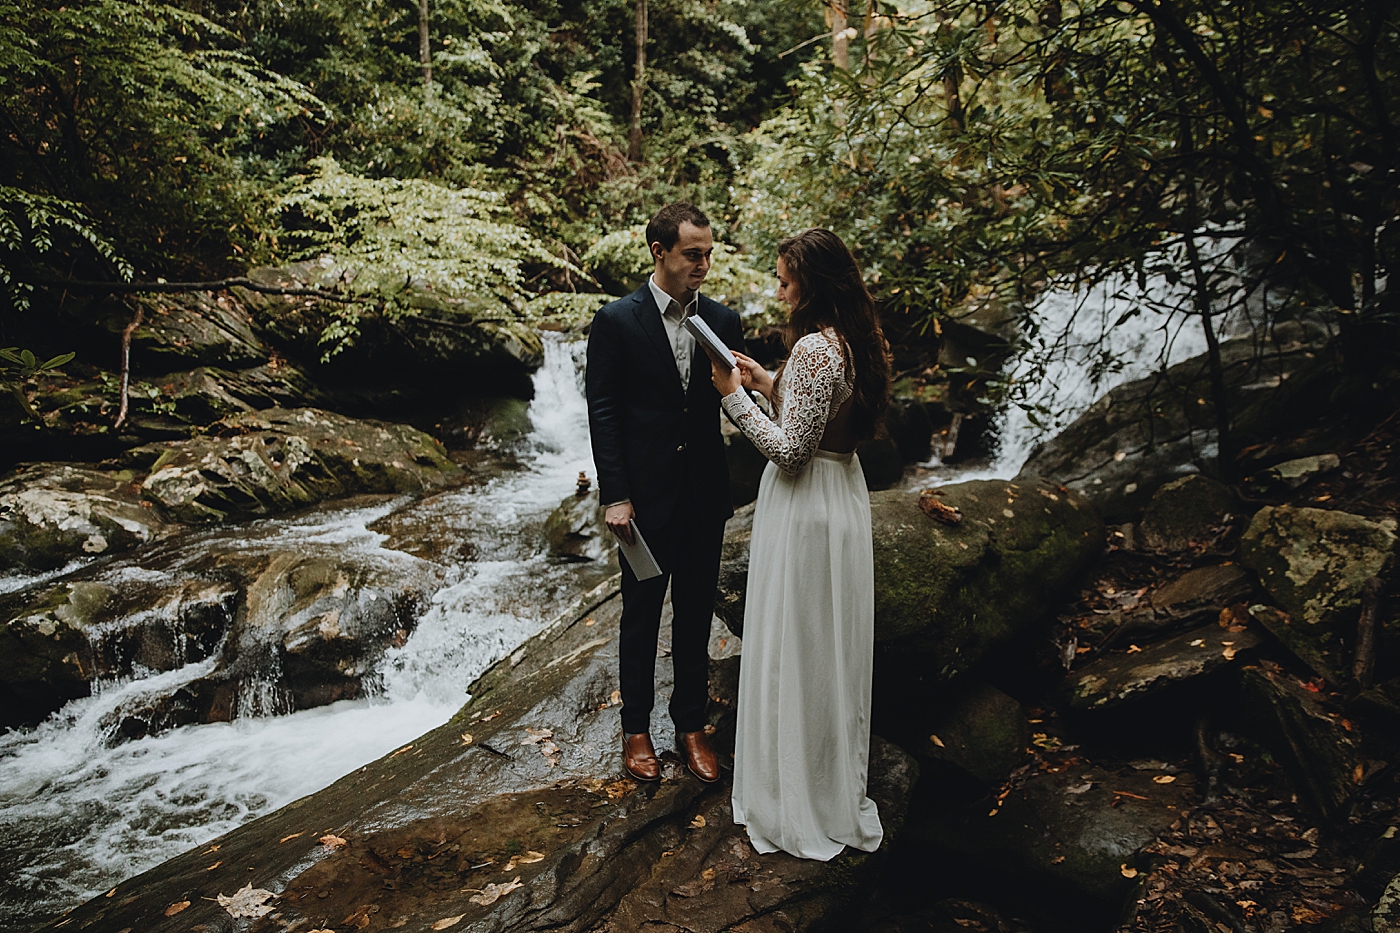 Bride delivering vows in forest Catawba Falls Asheville, NC Elopement Photography captured by Maggie Alvarez Photography